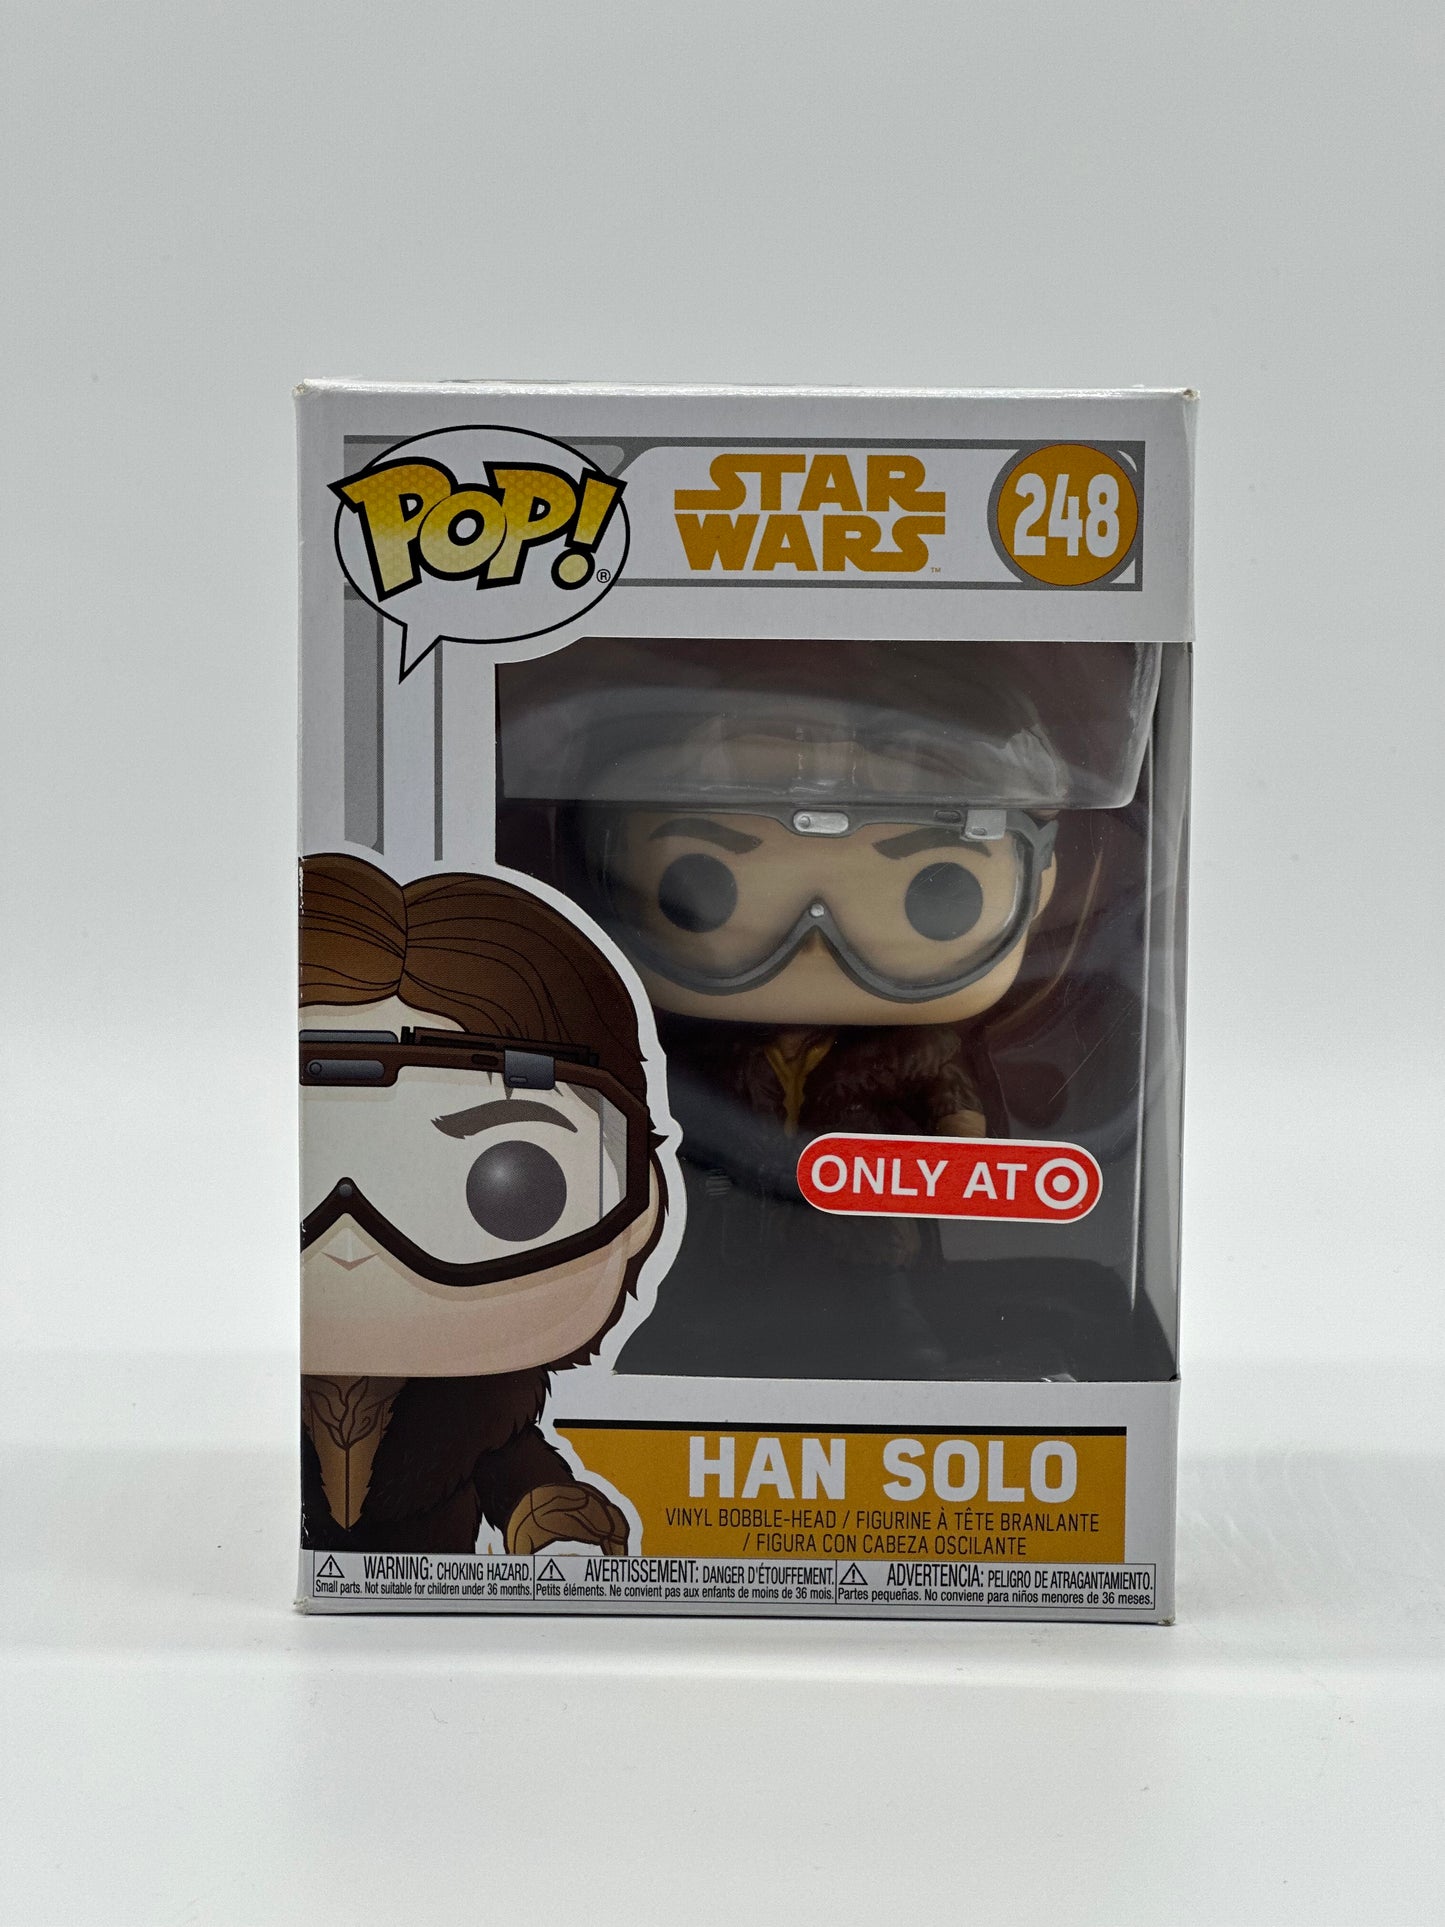 Pop! Star Wars 248 Han Solo Only At Target